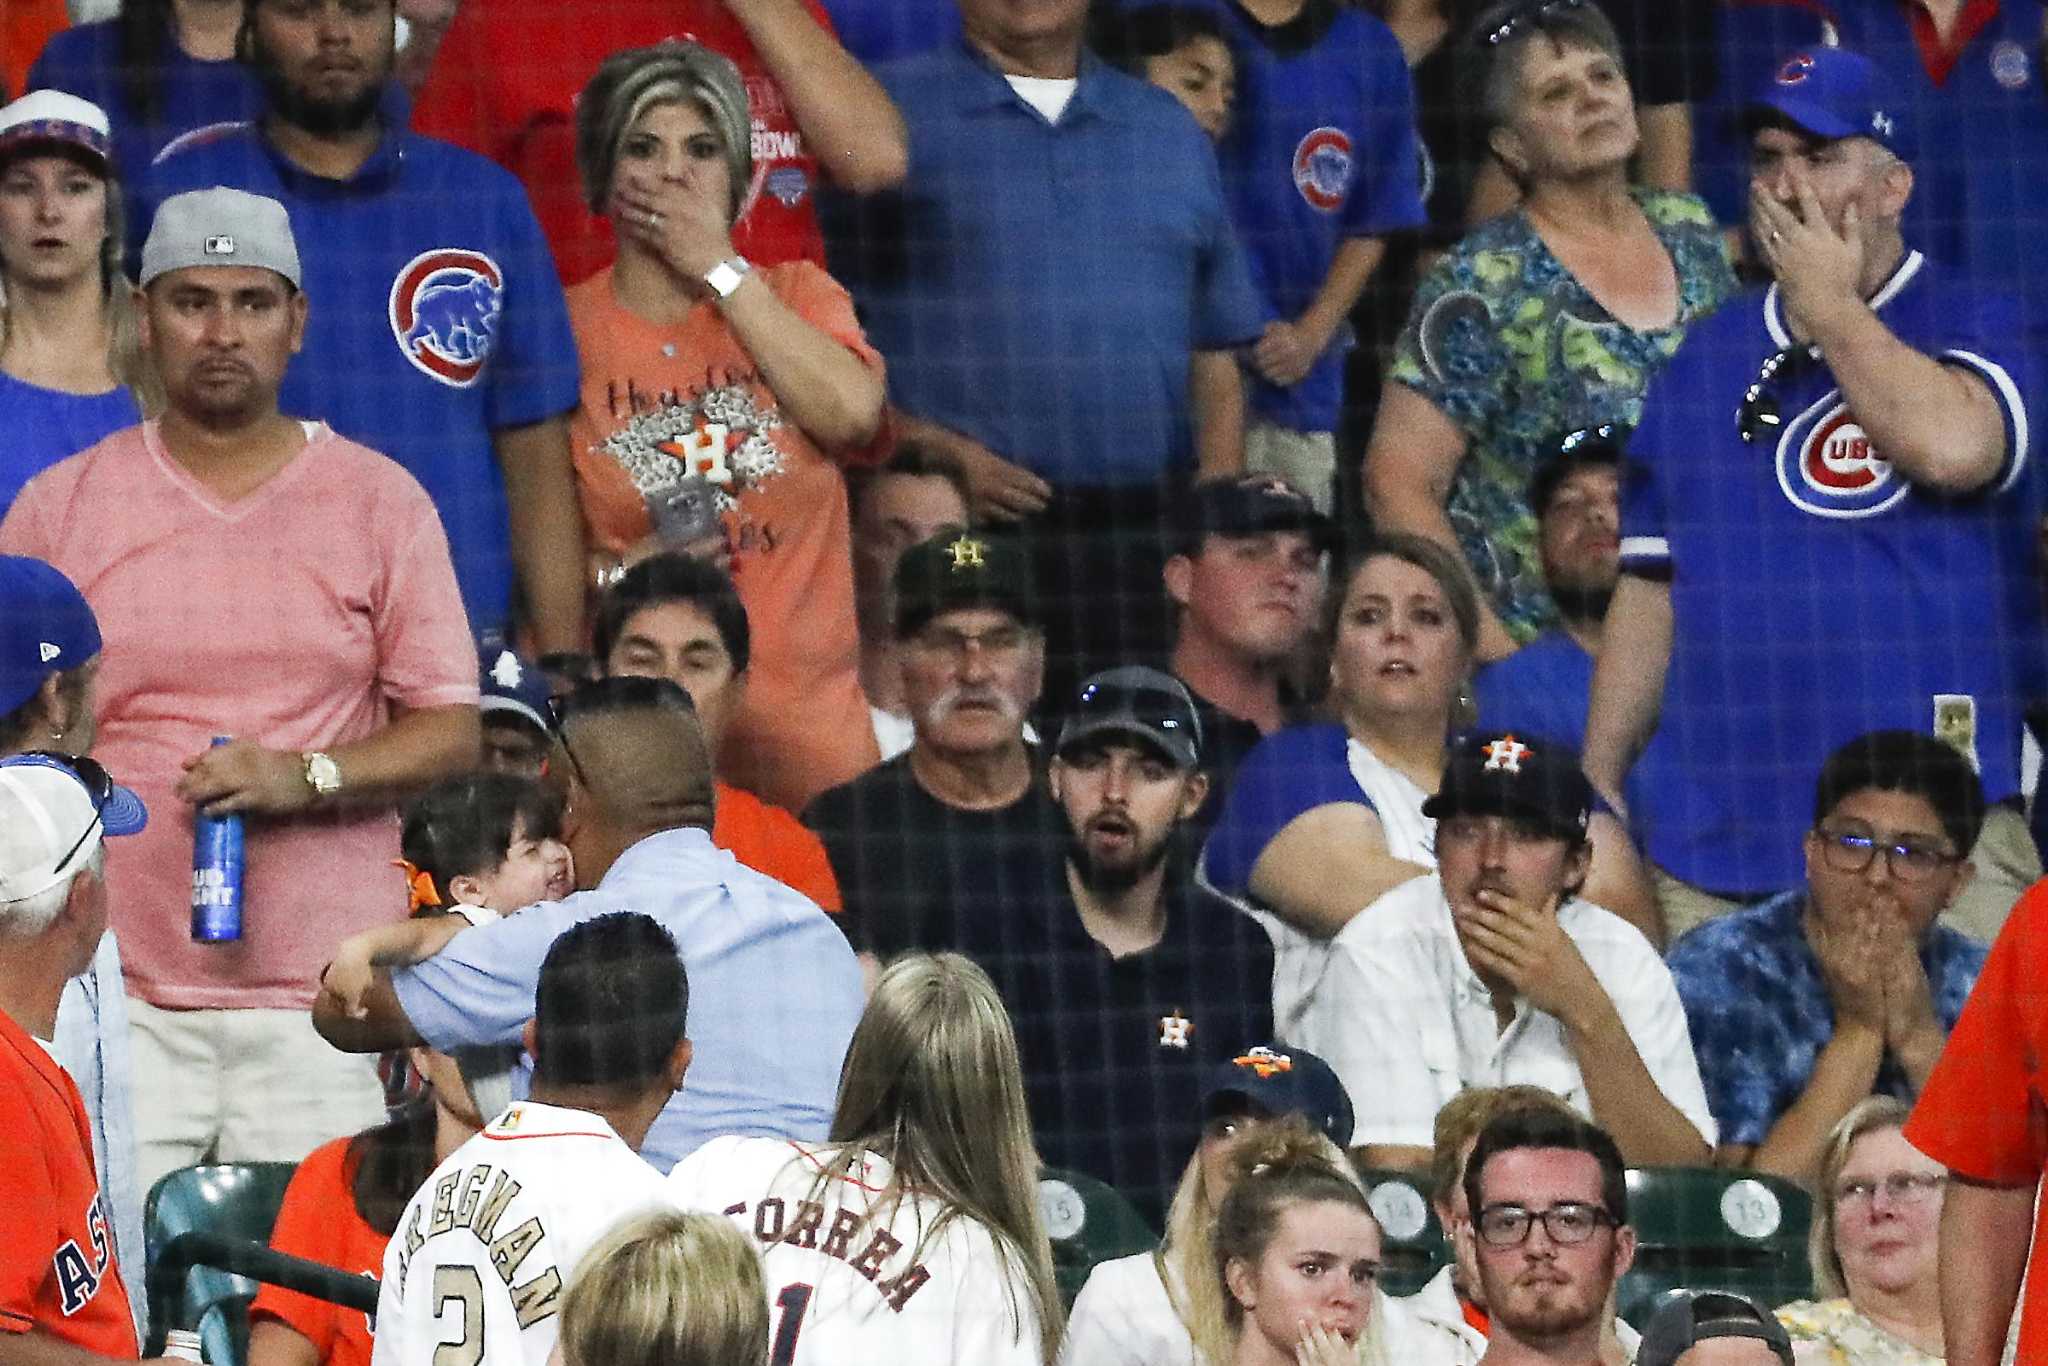 Girl hit by foul ball at Astros game still suffering, 7 months later